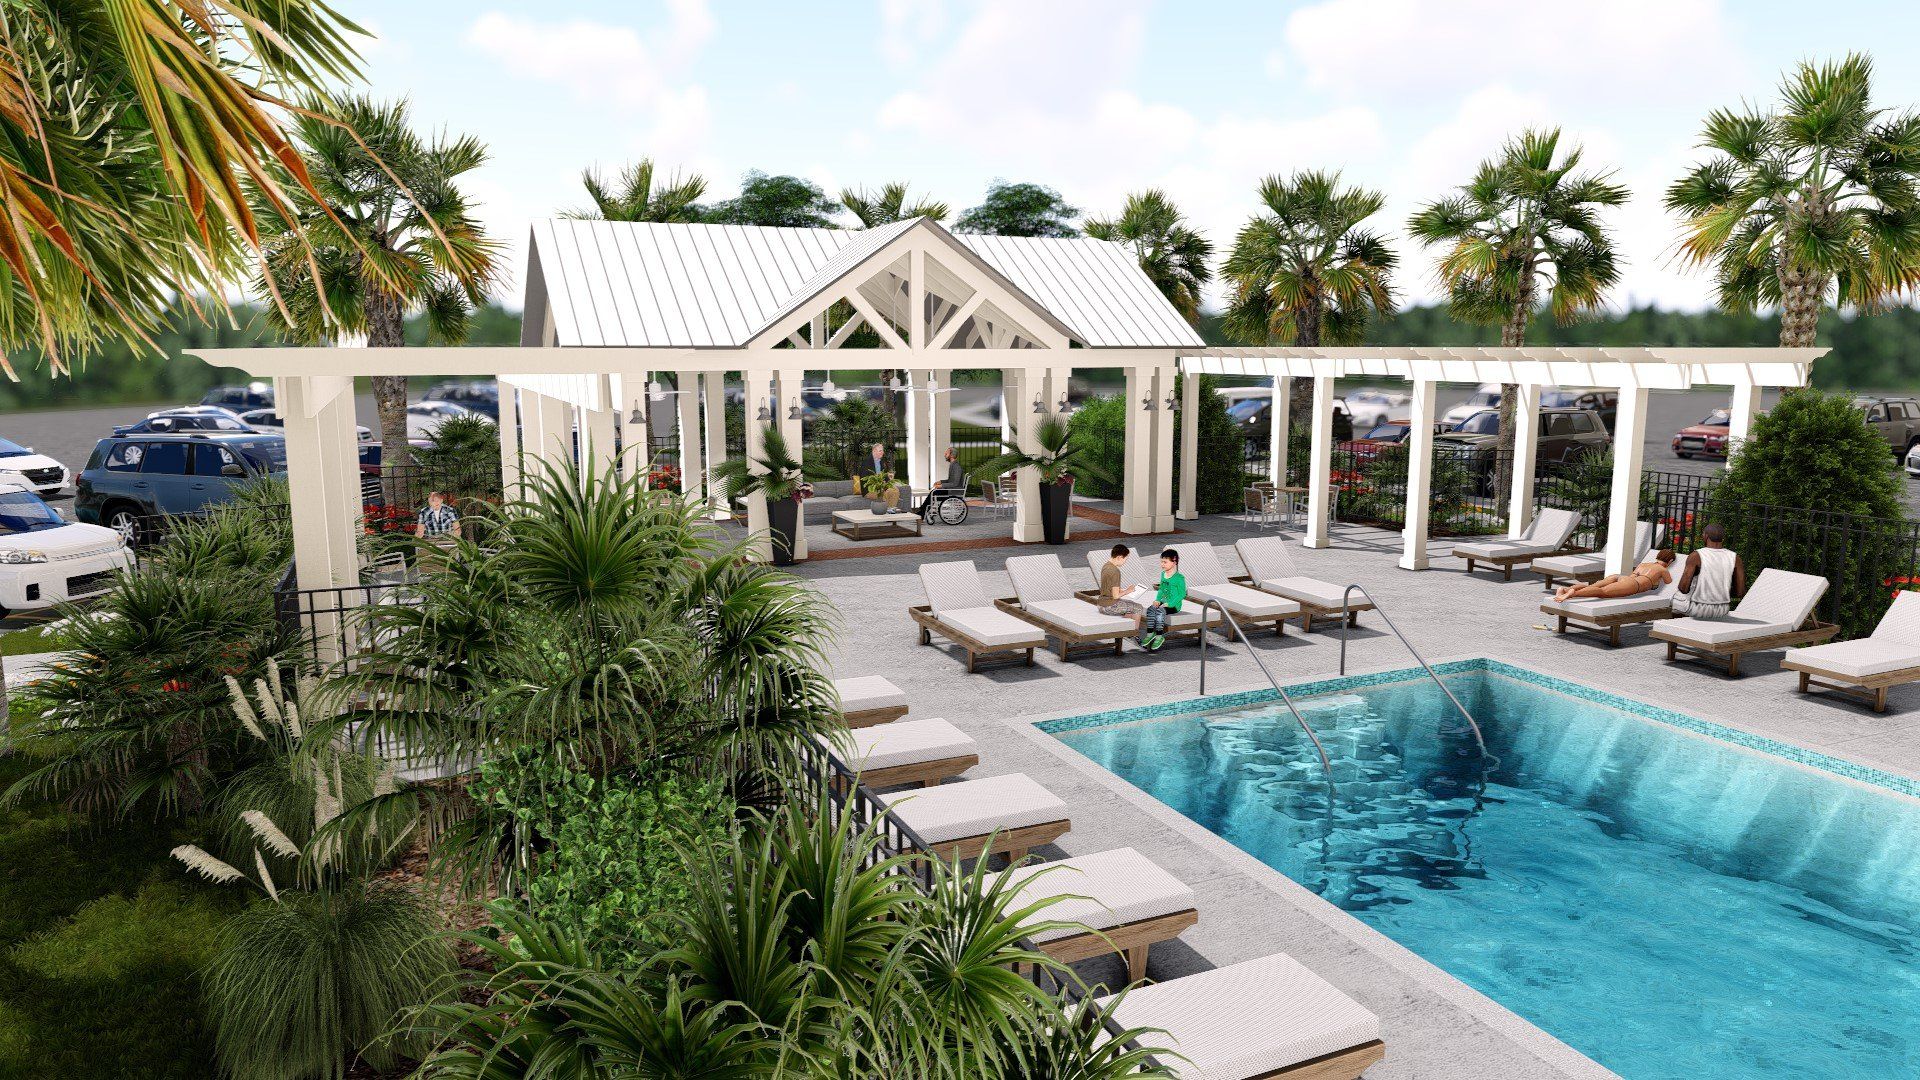 an artist 's impression of a swimming pool surrounded by lounge chairs and palm trees .